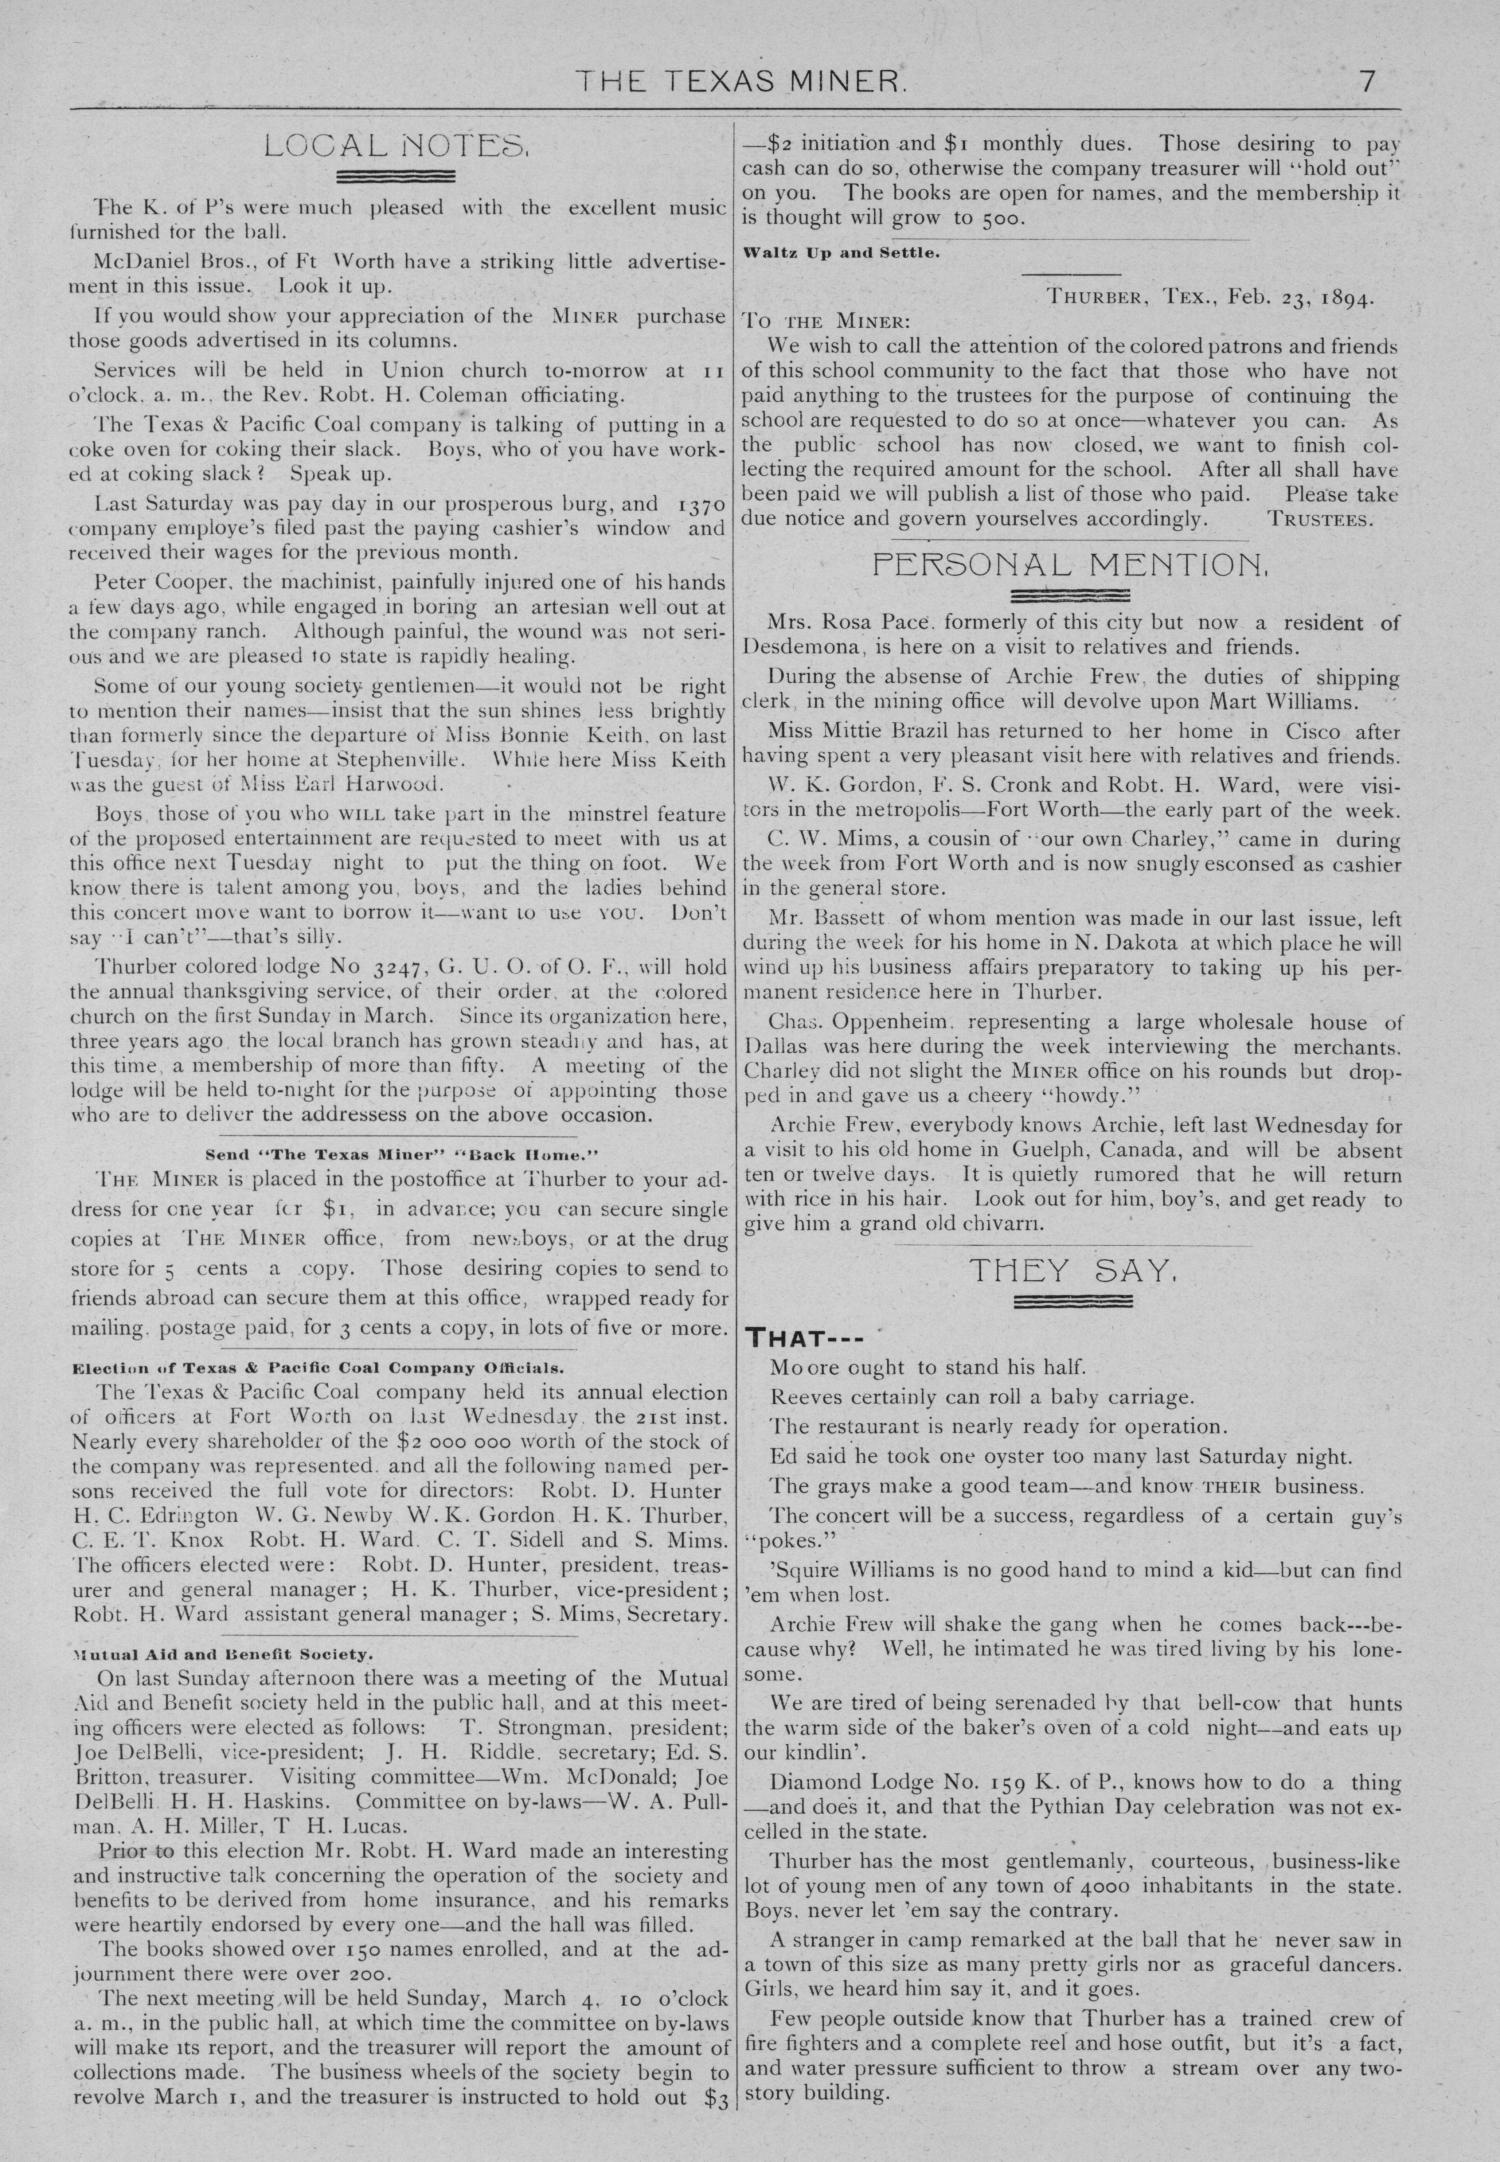 The Texas Miner, Volume 1, Number 6, February 24, 1894
                                                
                                                    7
                                                